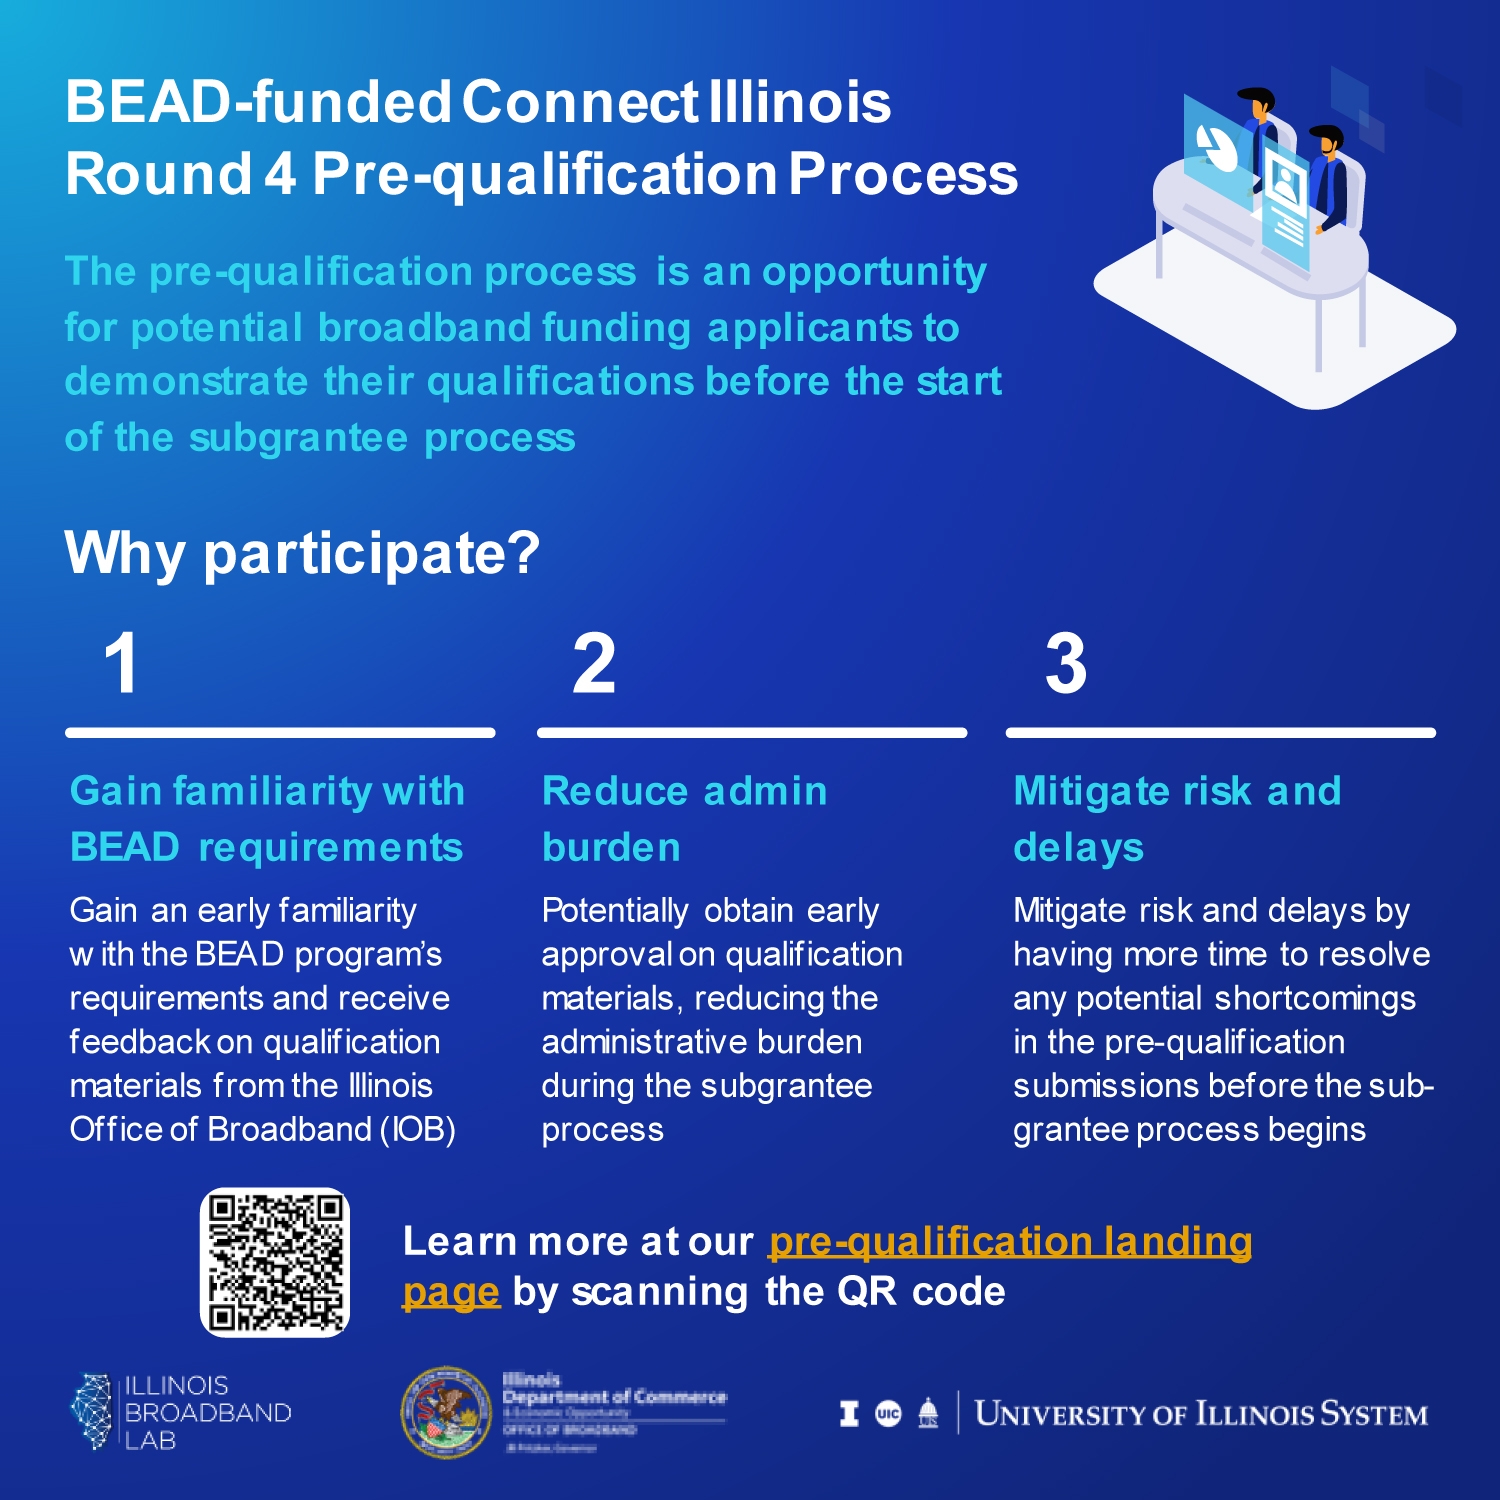 BEAD-funded Connect Illinois flyer image